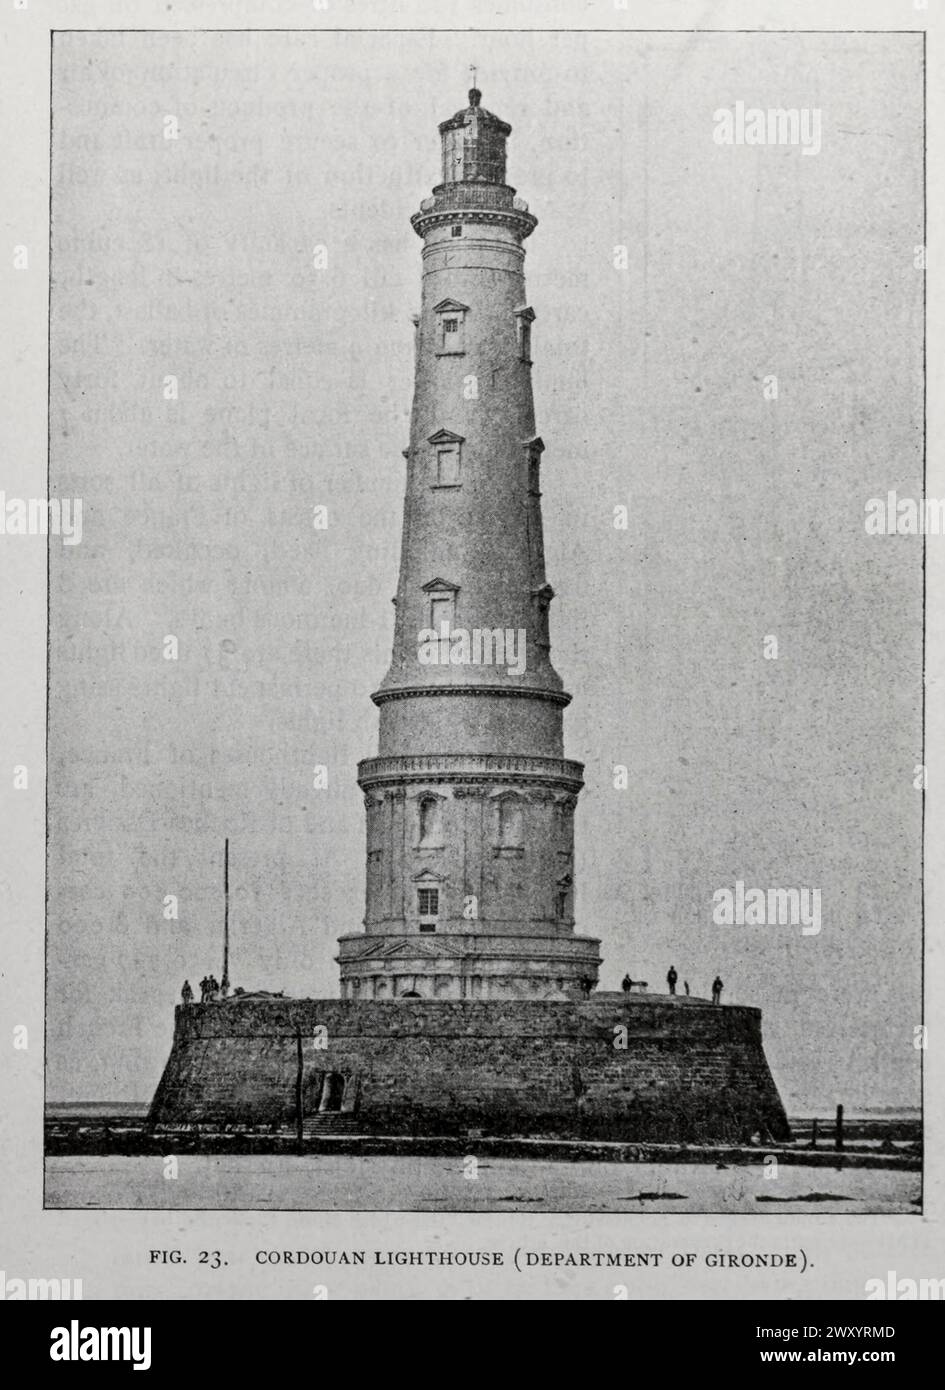 CORDOUAN LIGHTHOUSE (DEPARTMENT OF GIRONDE). from the Article THE LATEST IMPROVEMENTS IN THE FRENCH LIGHTHOUSE SYSTEM. By Jacques Boyer. from The Engineering Magazine Devoted to Industrial Progress Volume XVI October 1898 - March 1899 The Engineering Magazine Co Stock Photo